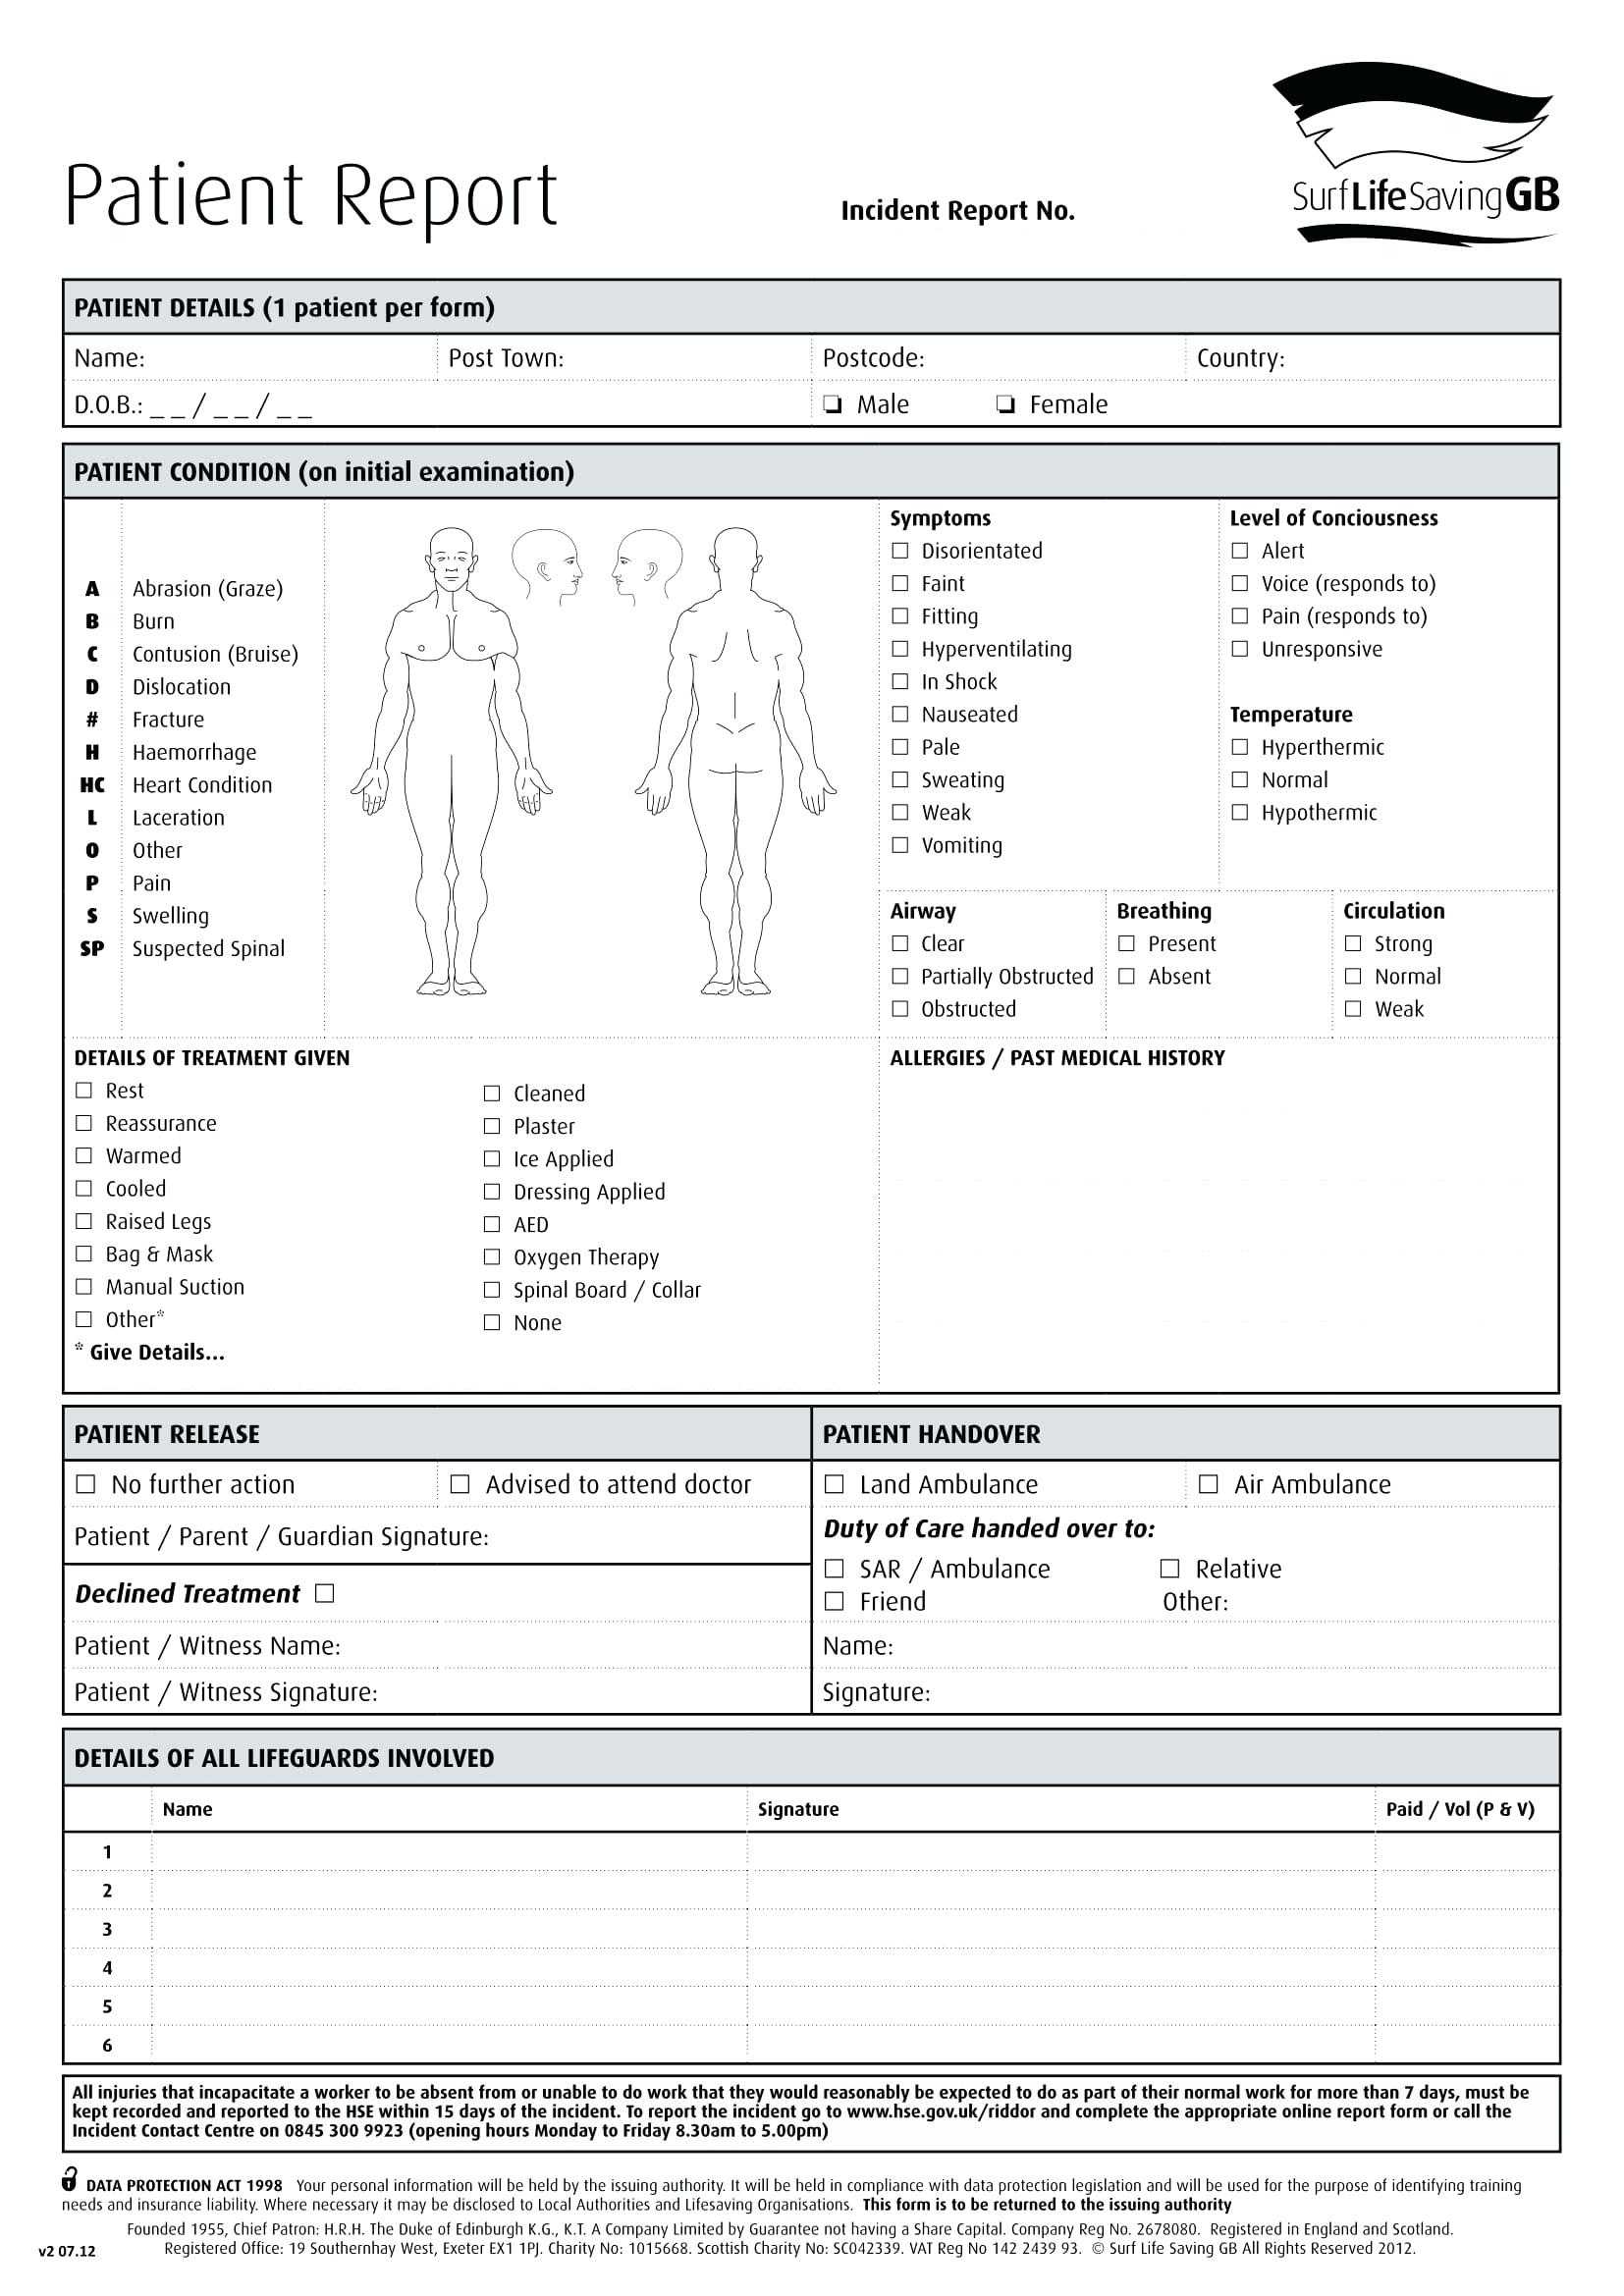 Incident Report Form Template Free Download – Vmarques Regarding Patient Report Form Template Download